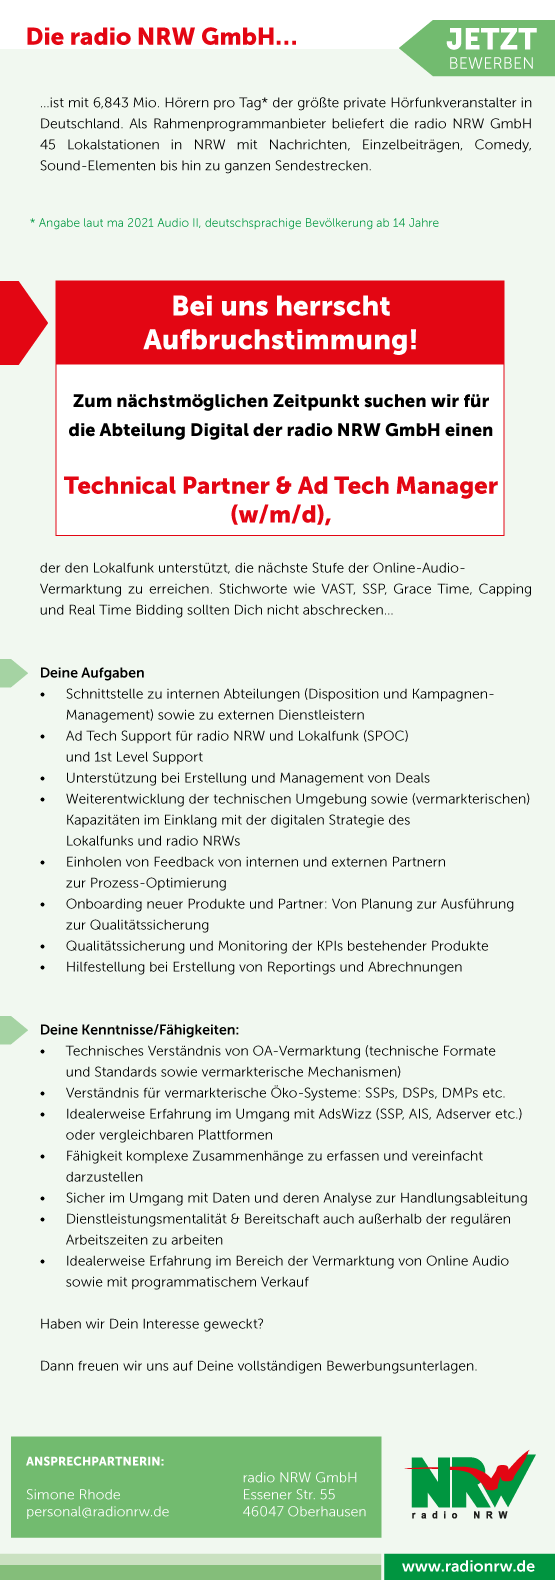 radio NRW sucht Technical Parter & Ad Tech Manager (w/m/d)